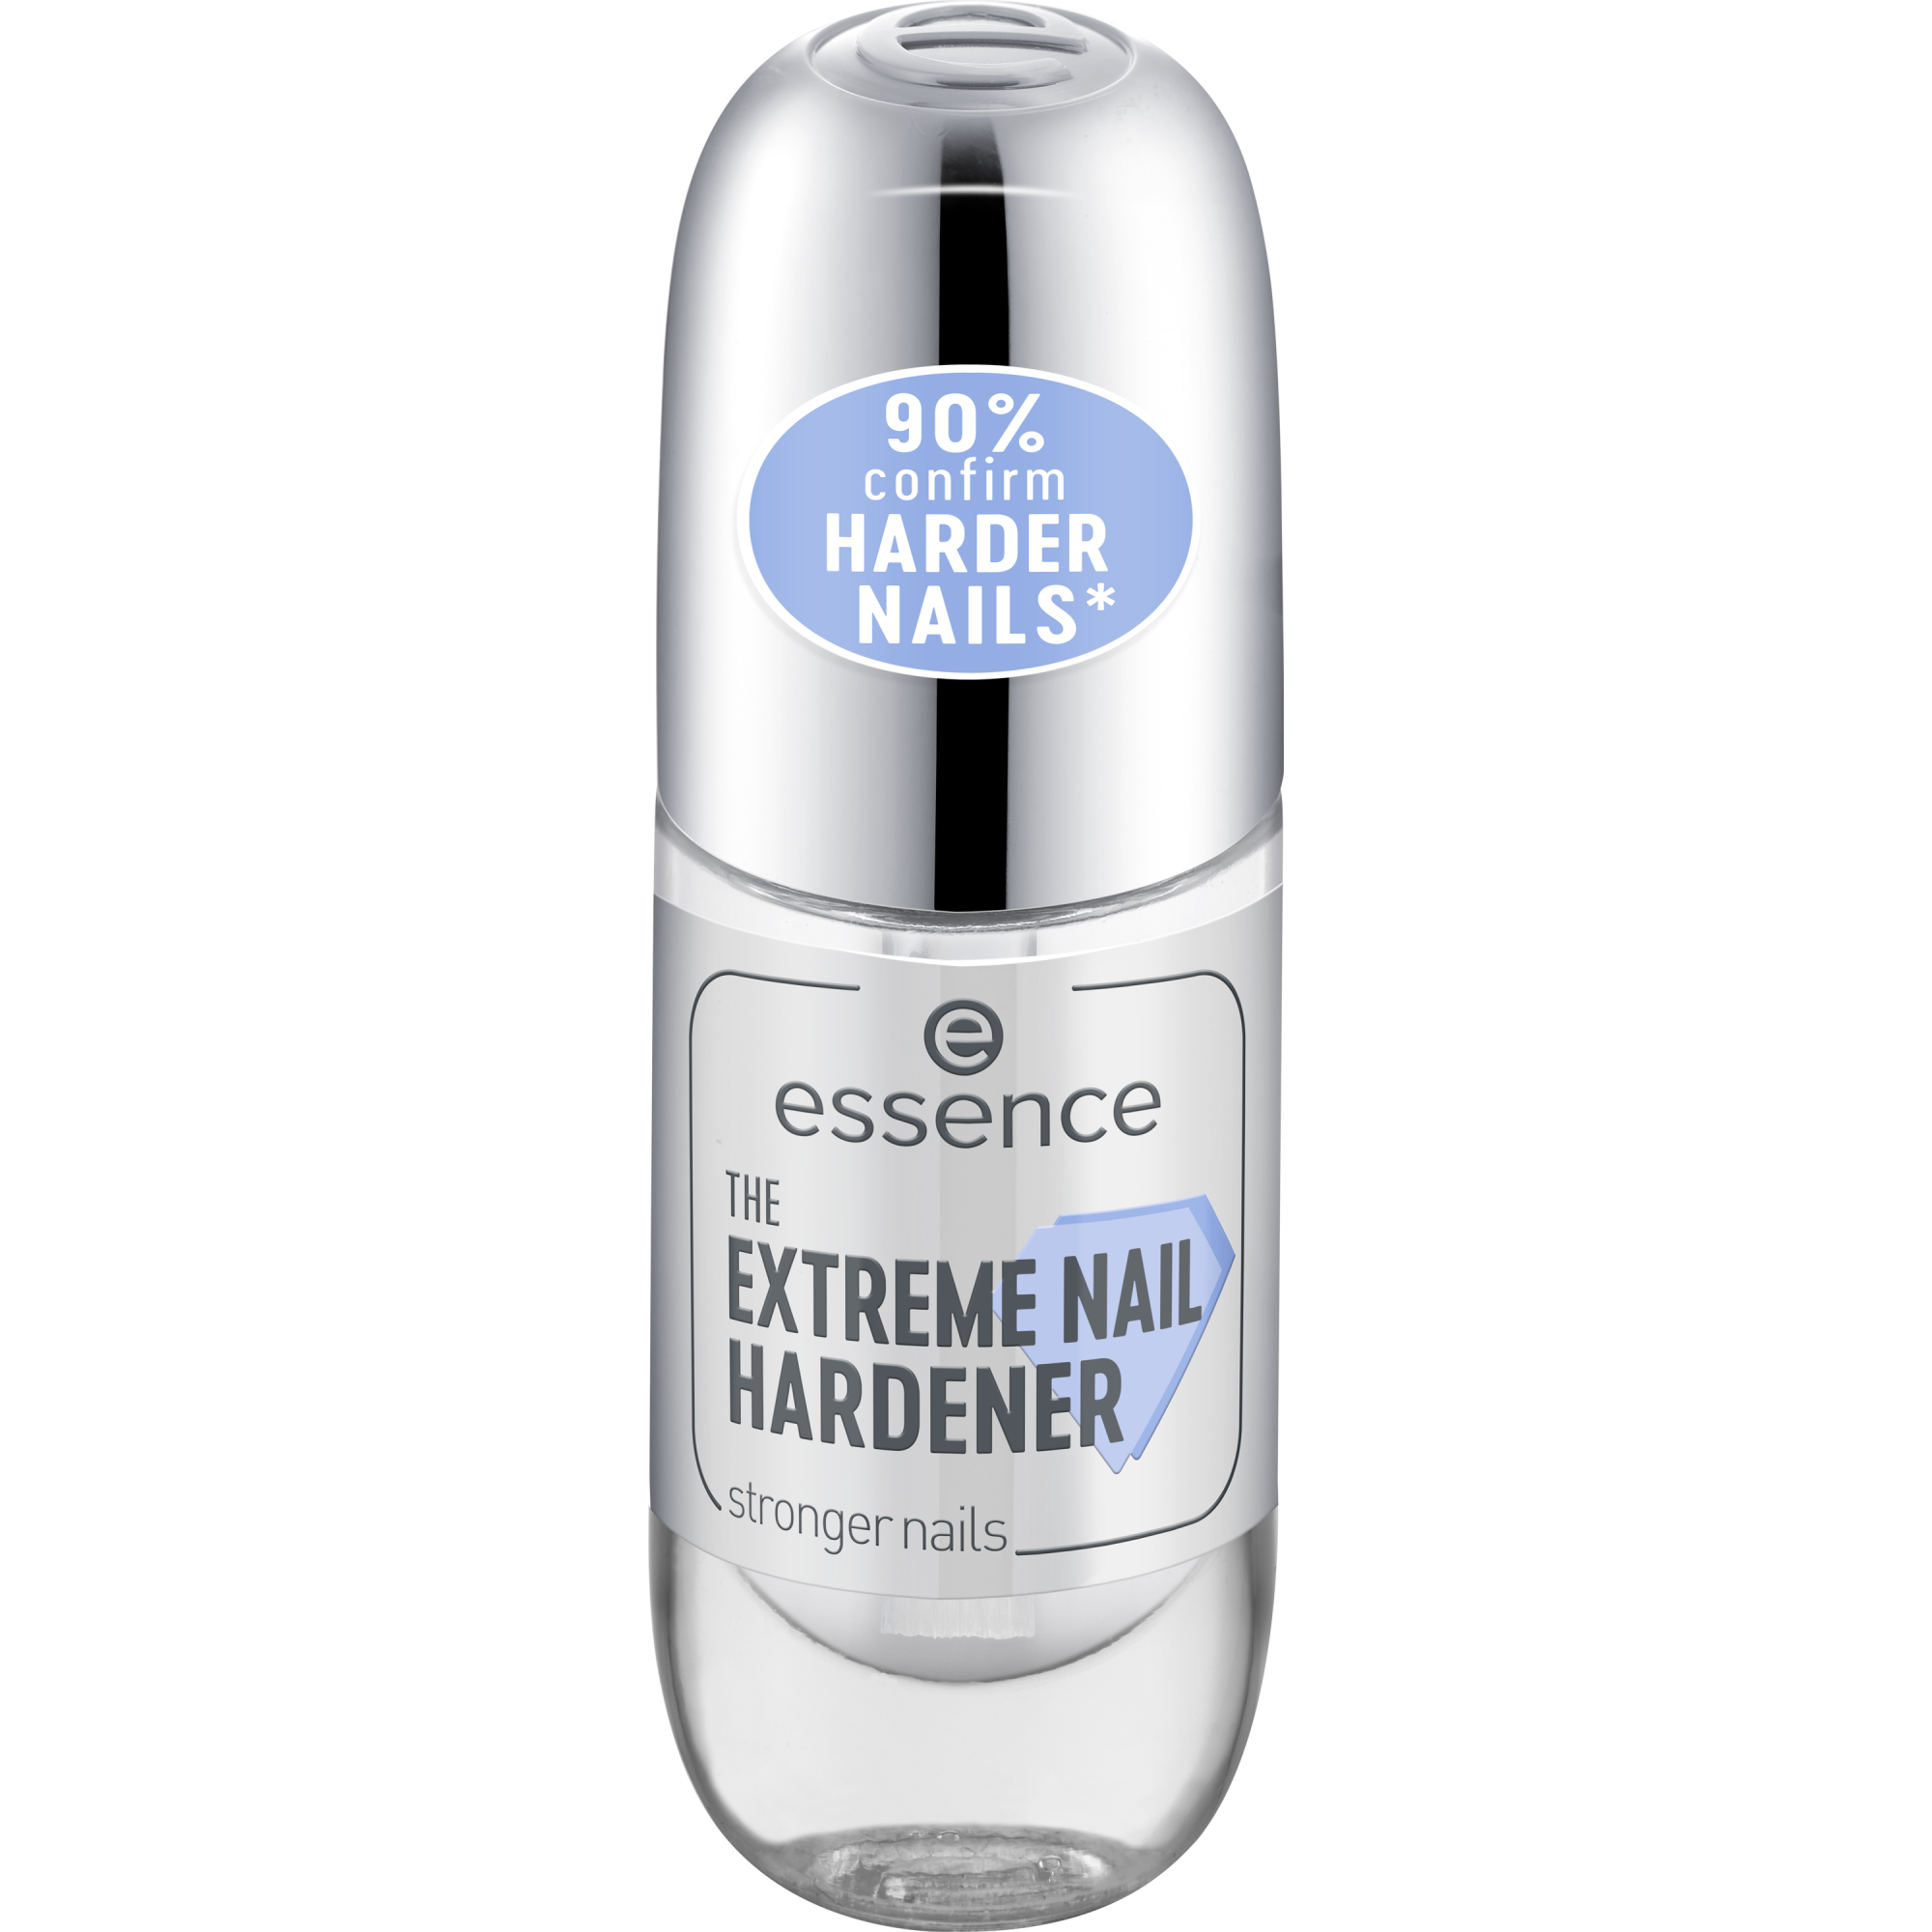 THE EXTREME NAIL HARDENER durcisseur d’ongles